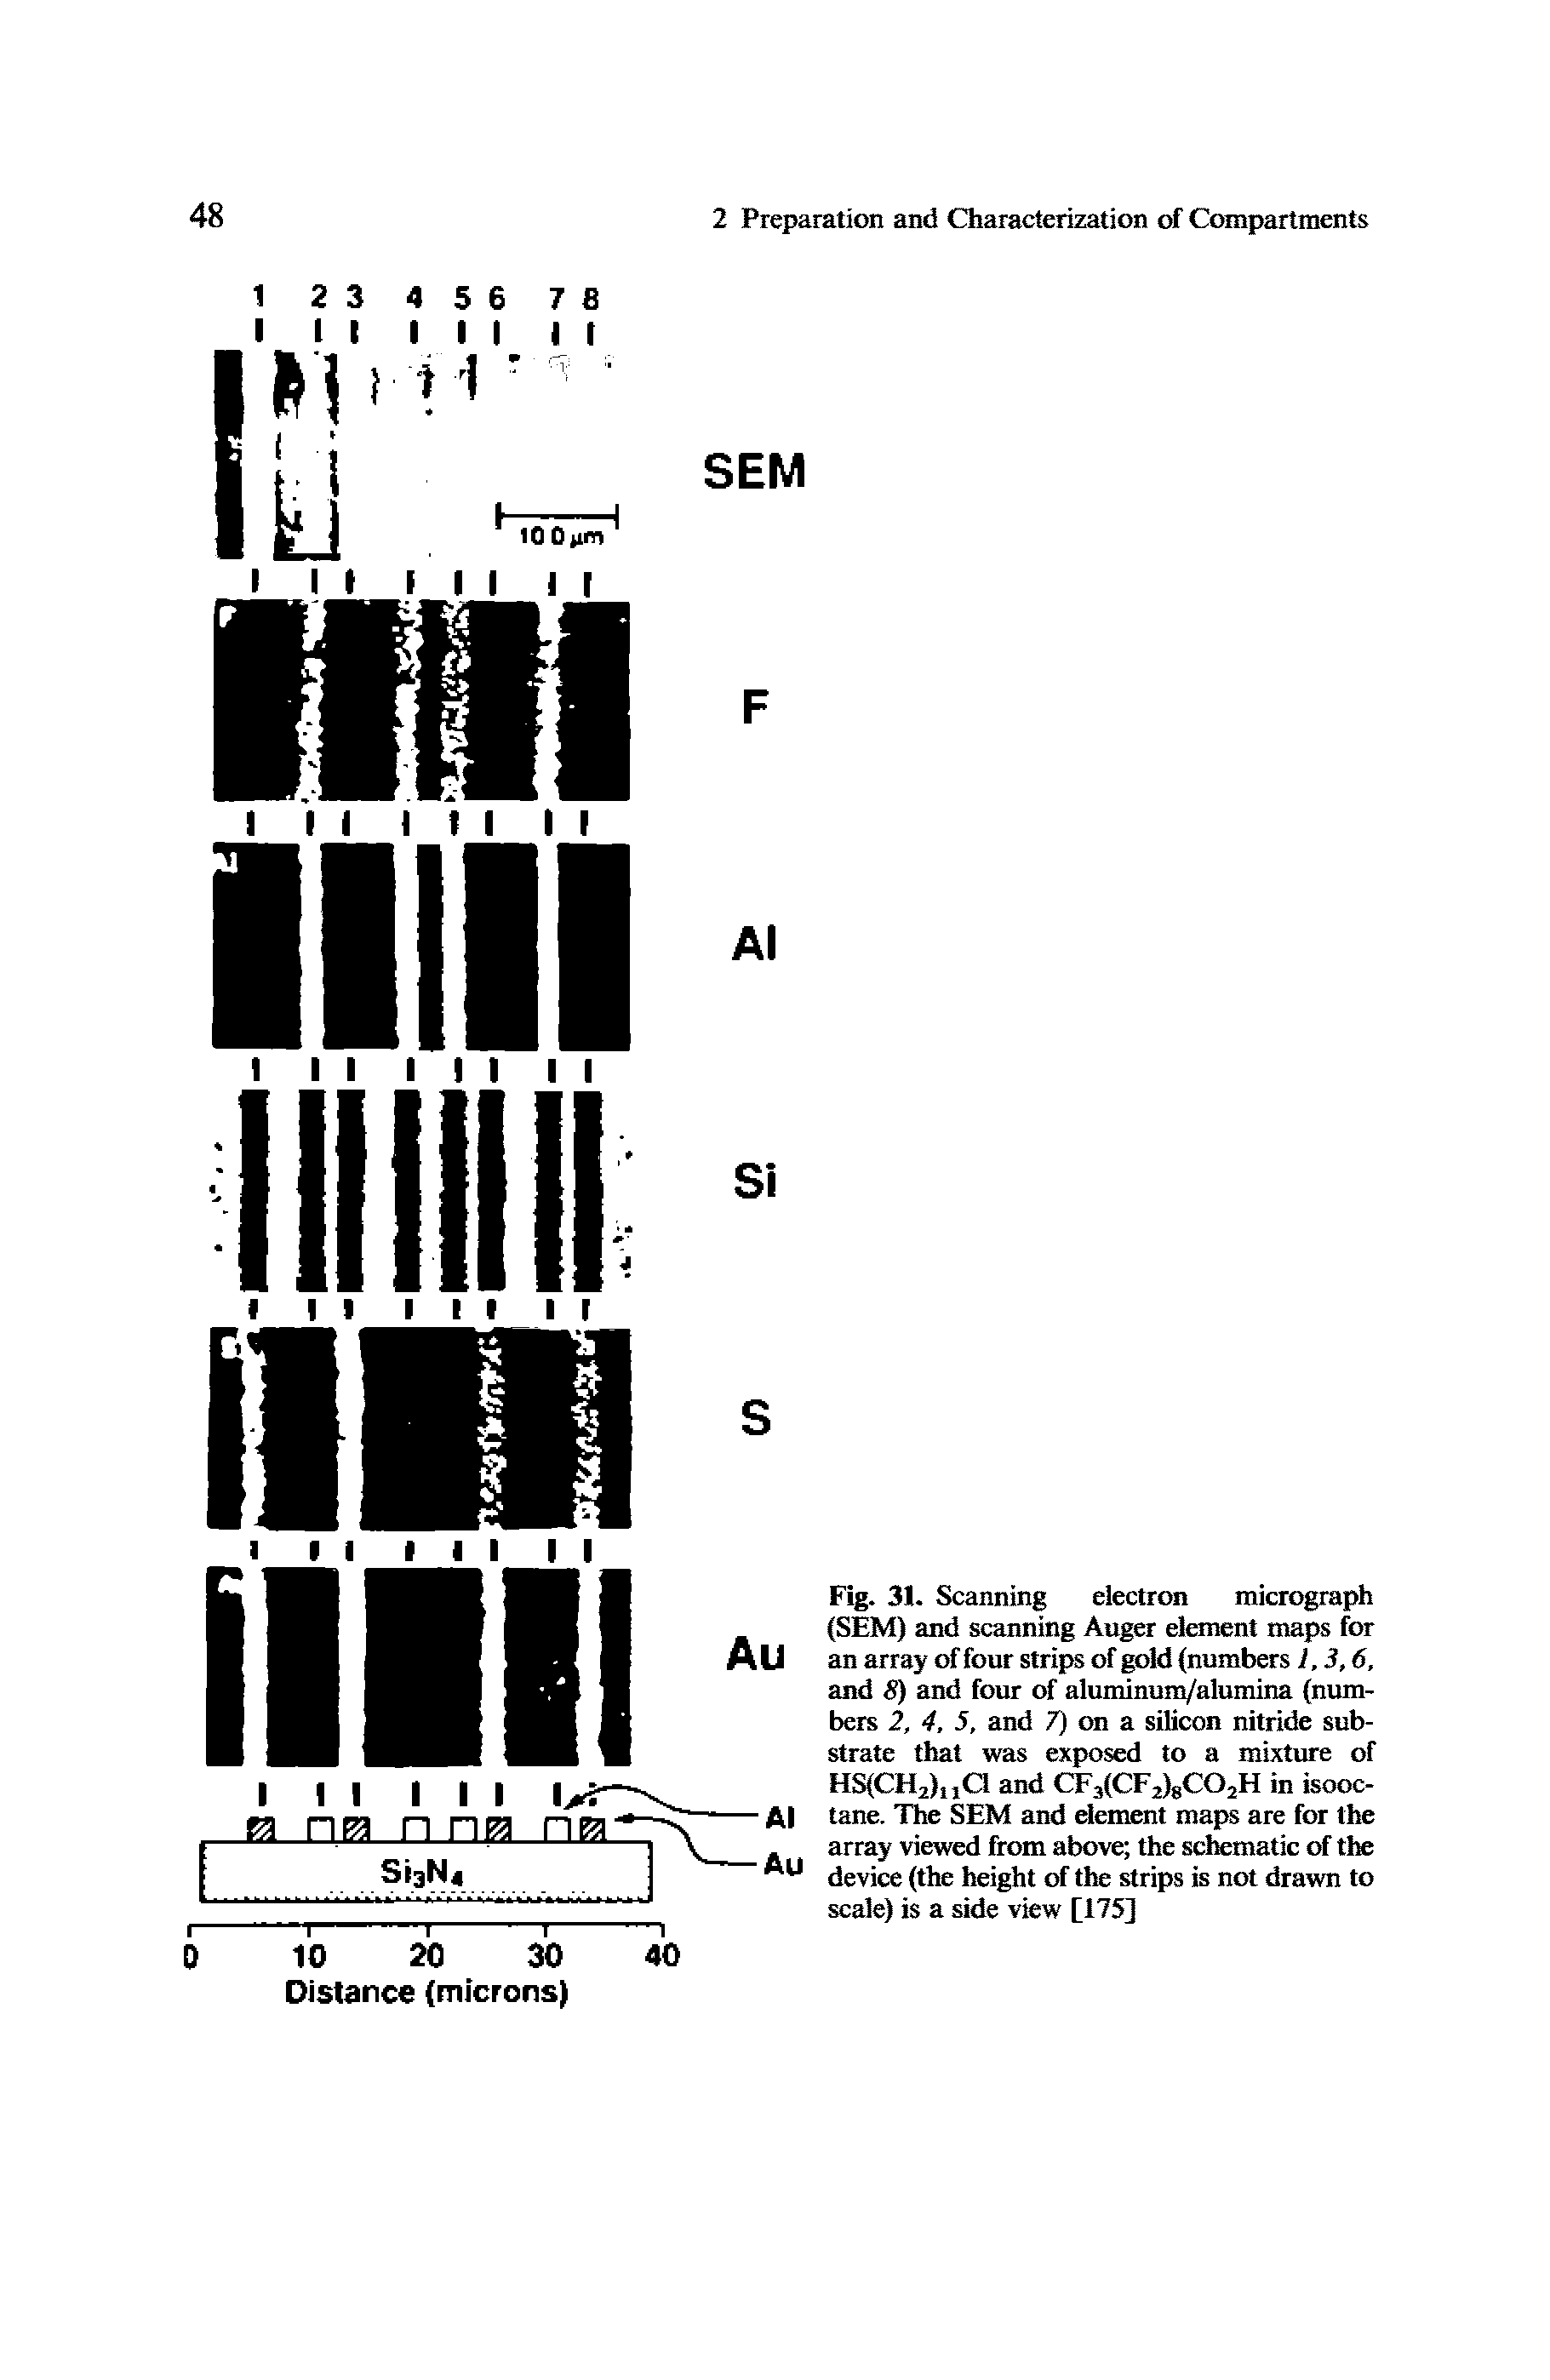 Fig. 31. Scanning electron micrograph (SEM) and scanning Auger element maps for an array of four strips of gold numbers 1,3,6, and 8) and four of aluminum/alumina (numbers 2, 4, 5, and 7) on a silicon nitride substrate that was exposed to a mixture of HS(CH2),, C1 and CF3(CF2)8C02H in isooctane. The SEM and element maps are for the array viewed from above the schematic of the device (the height of the strips is not drawn to scale) is a side view [175]...